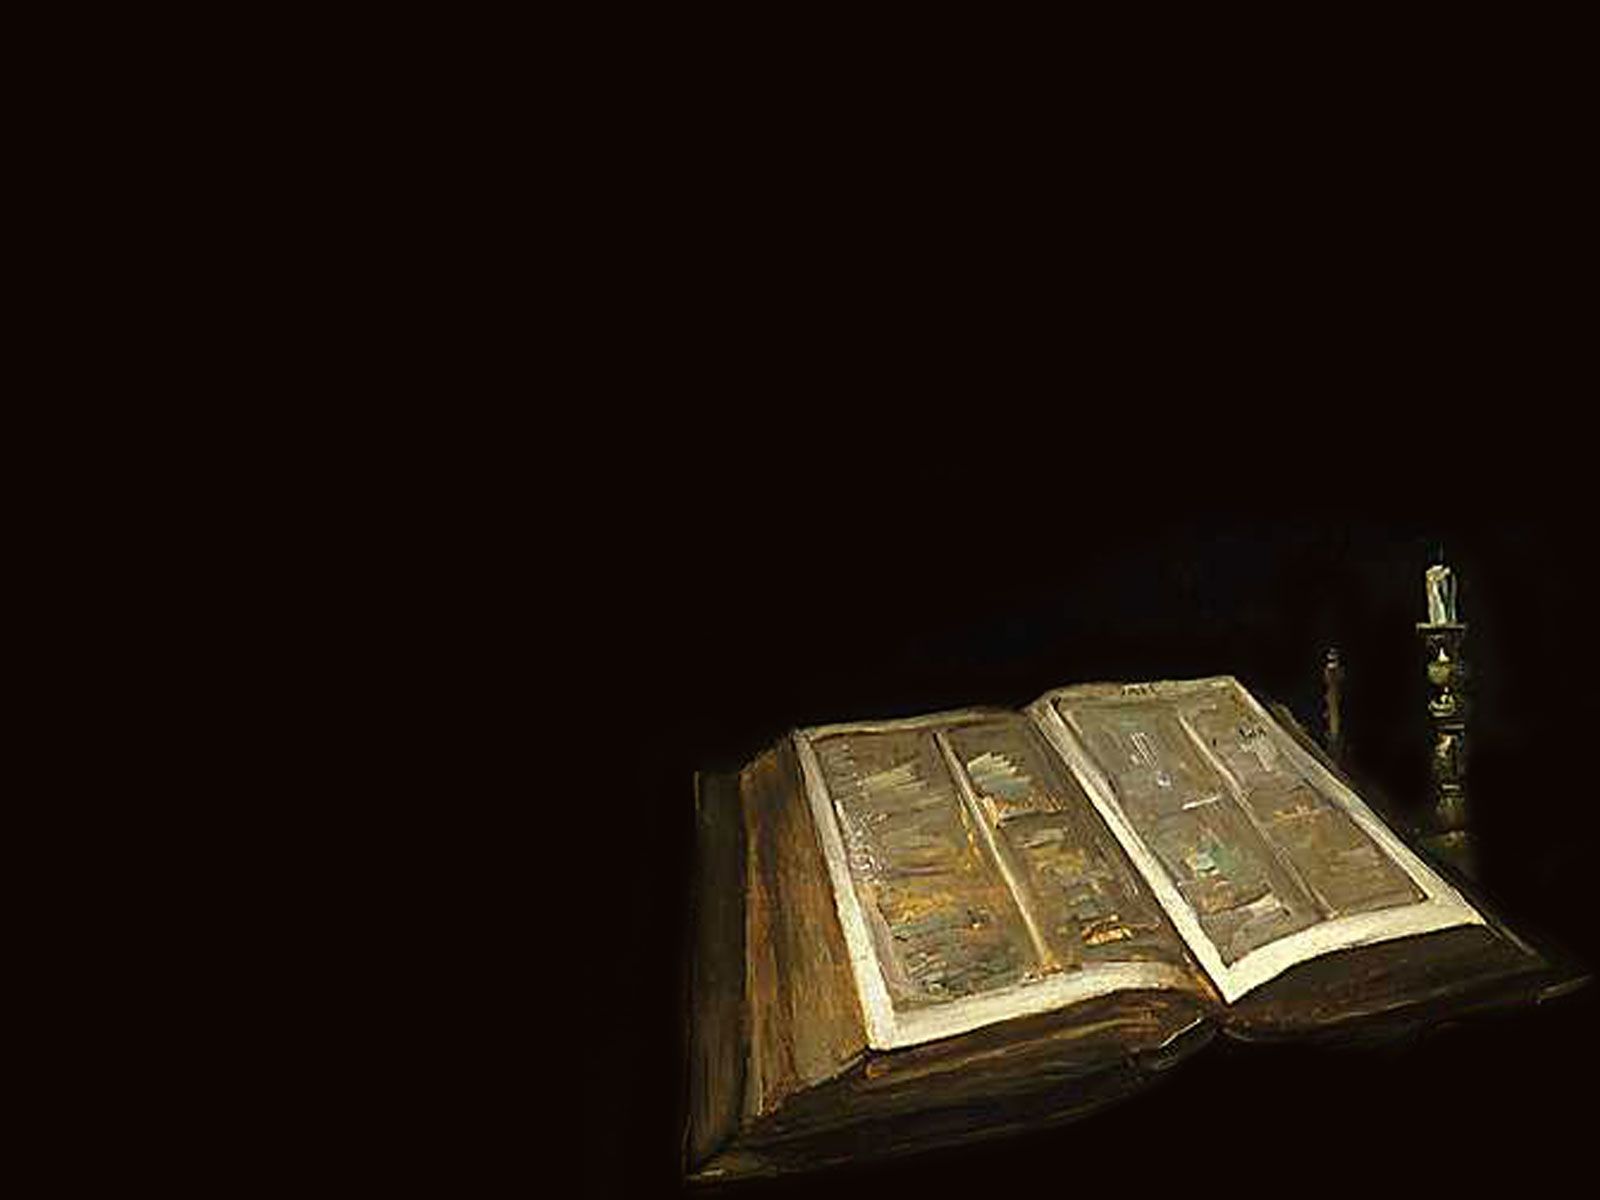 Holy bible II Wallpaper   Christian Wallpapers and Backgrounds